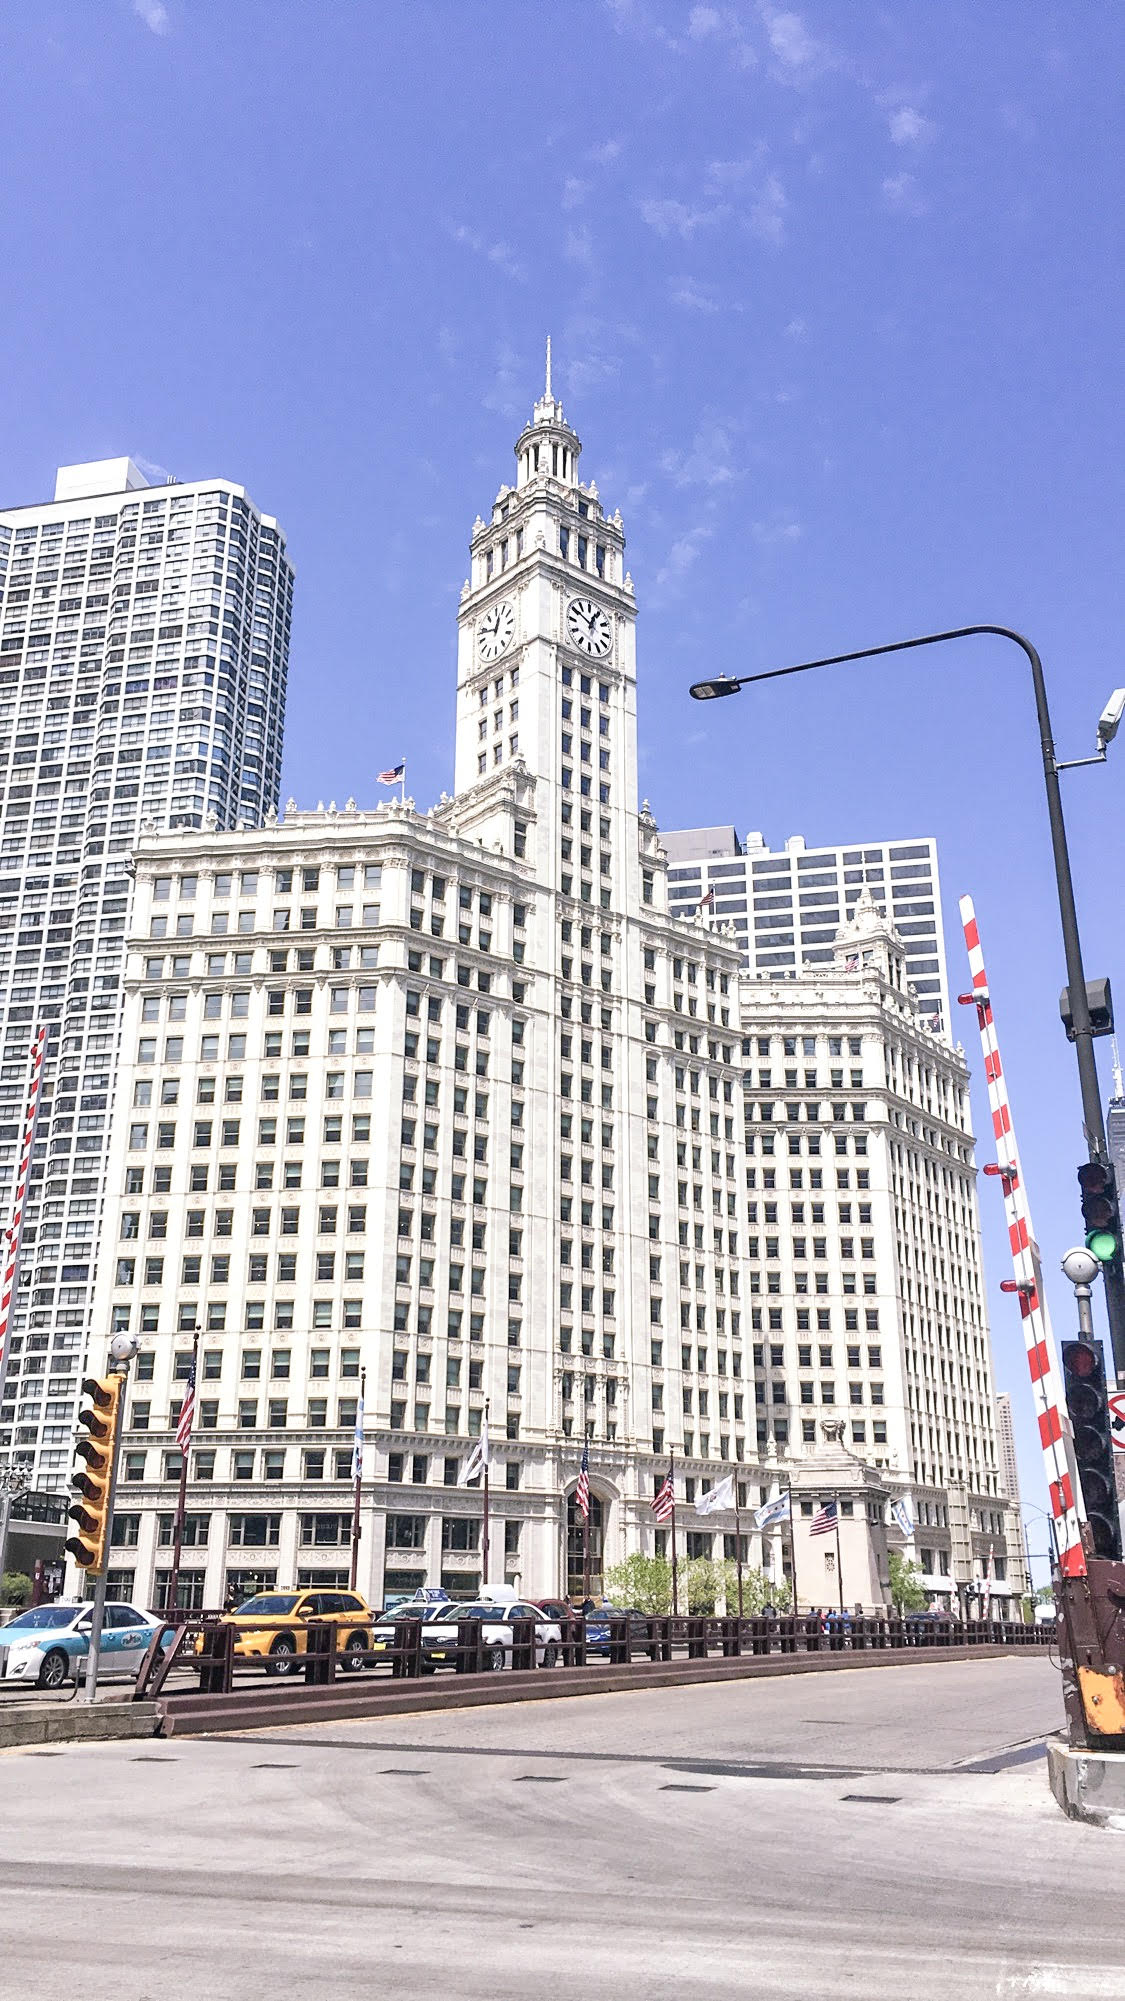 wrigley building in chicago